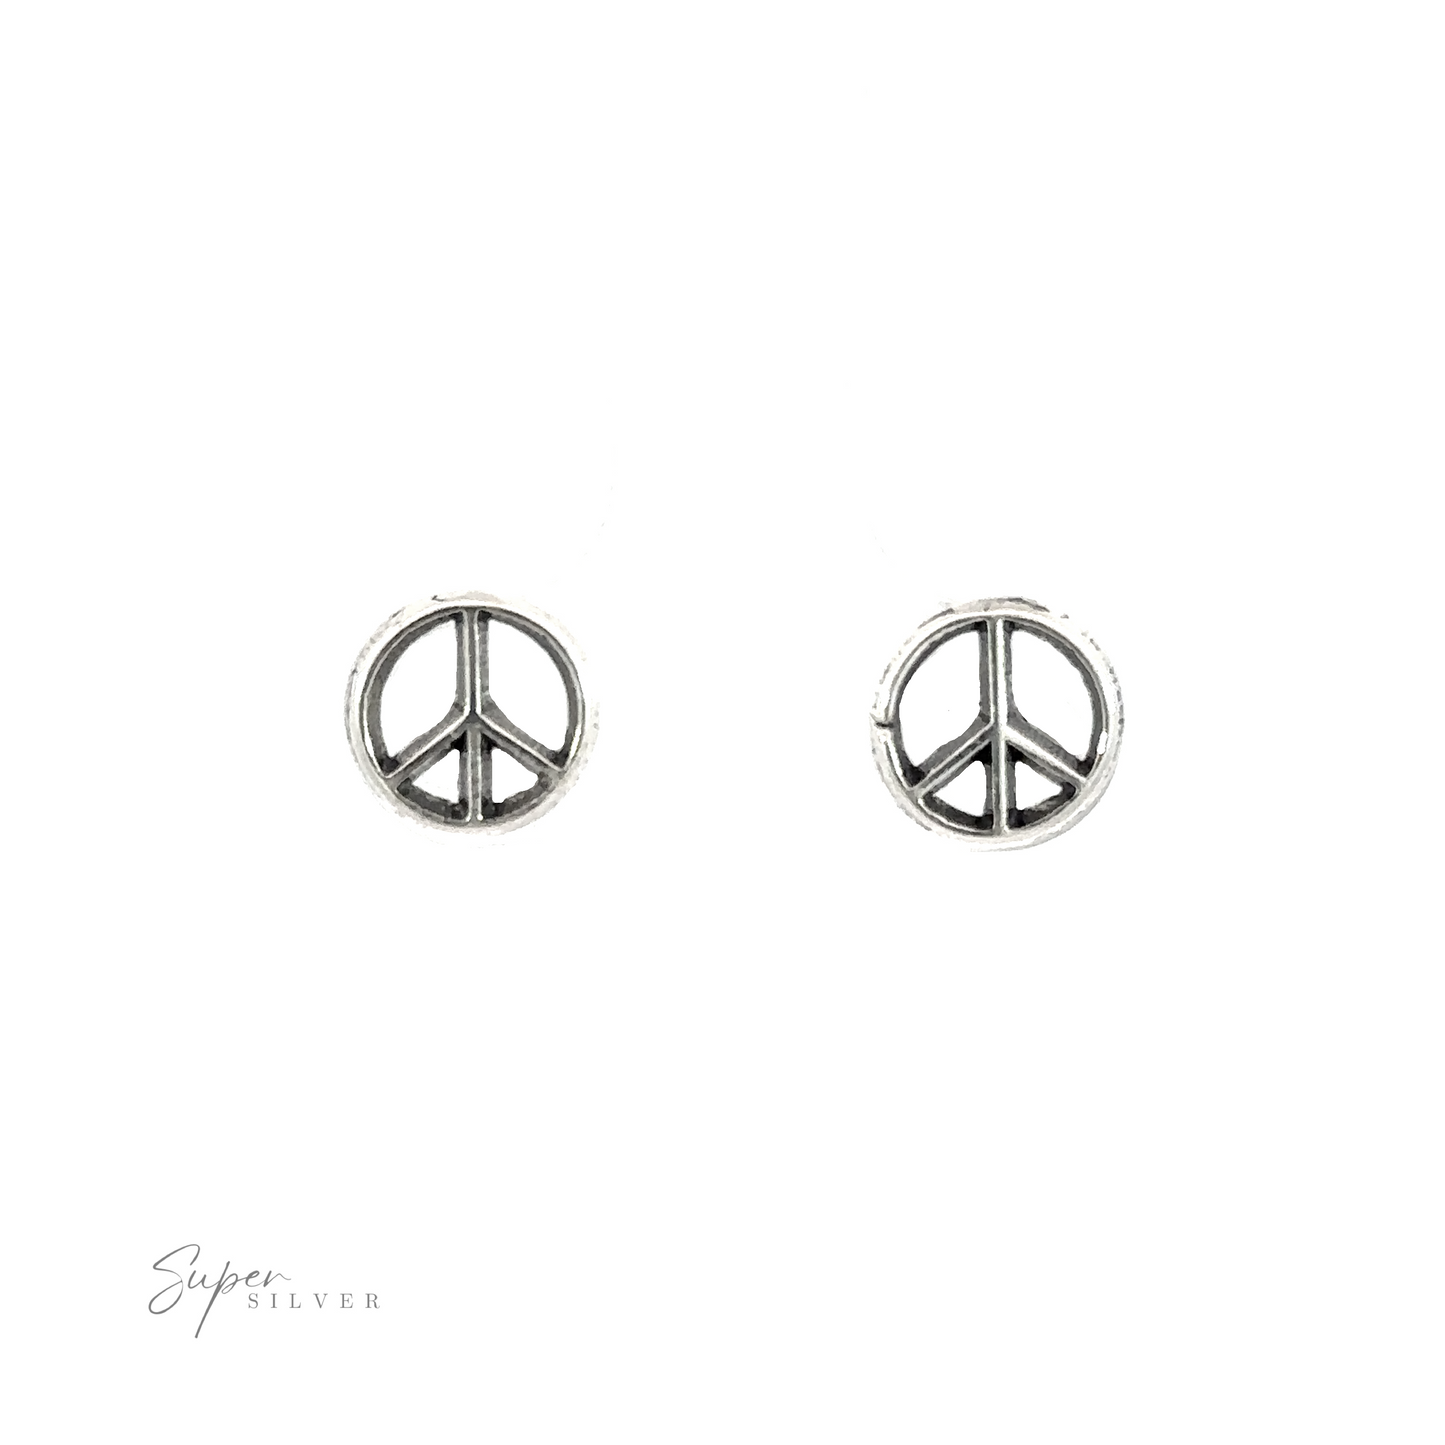 A pair of Peace Sign Studs representing tranquility on a white background.